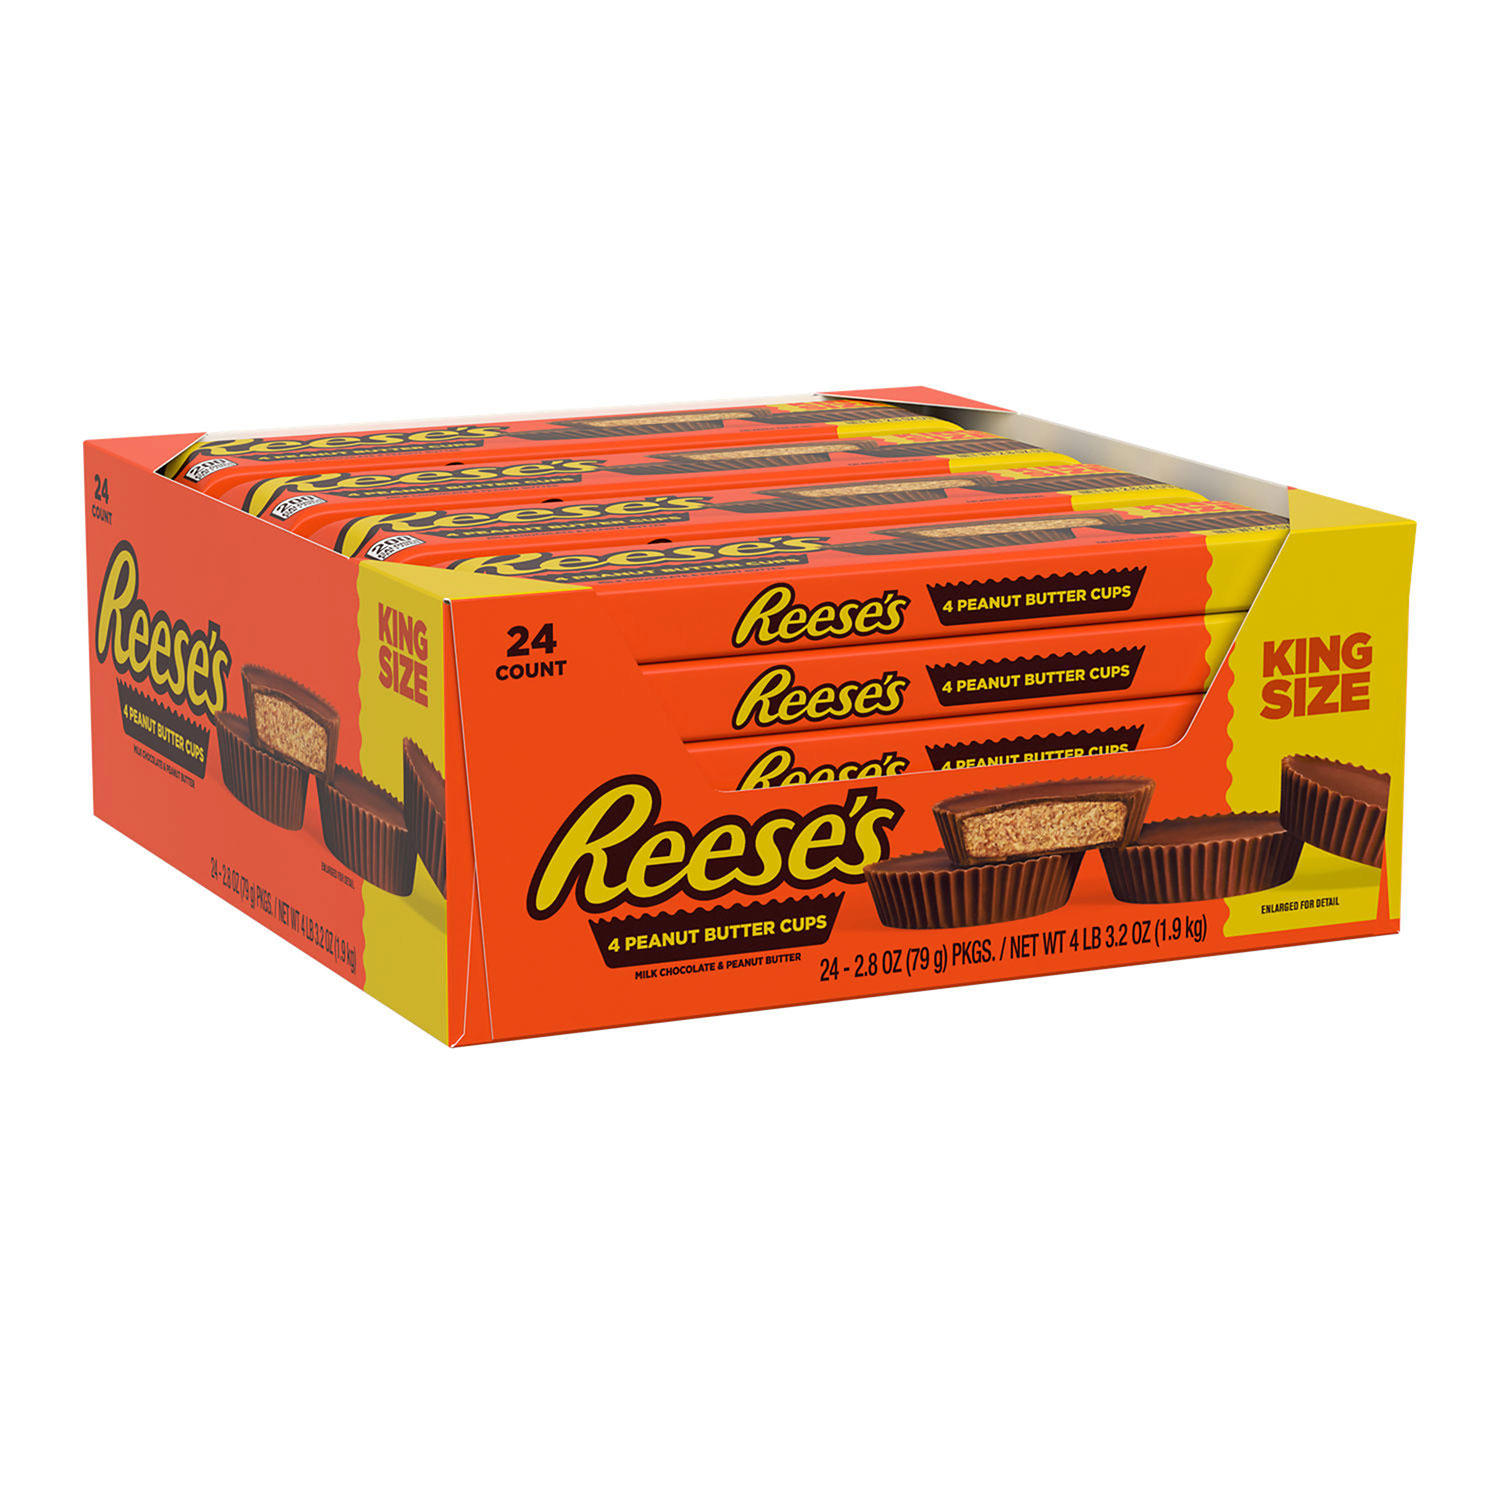 REESE'S Milk Chocolate King Size Peanut Butter Cups, 2.4 oz, 24 pk.